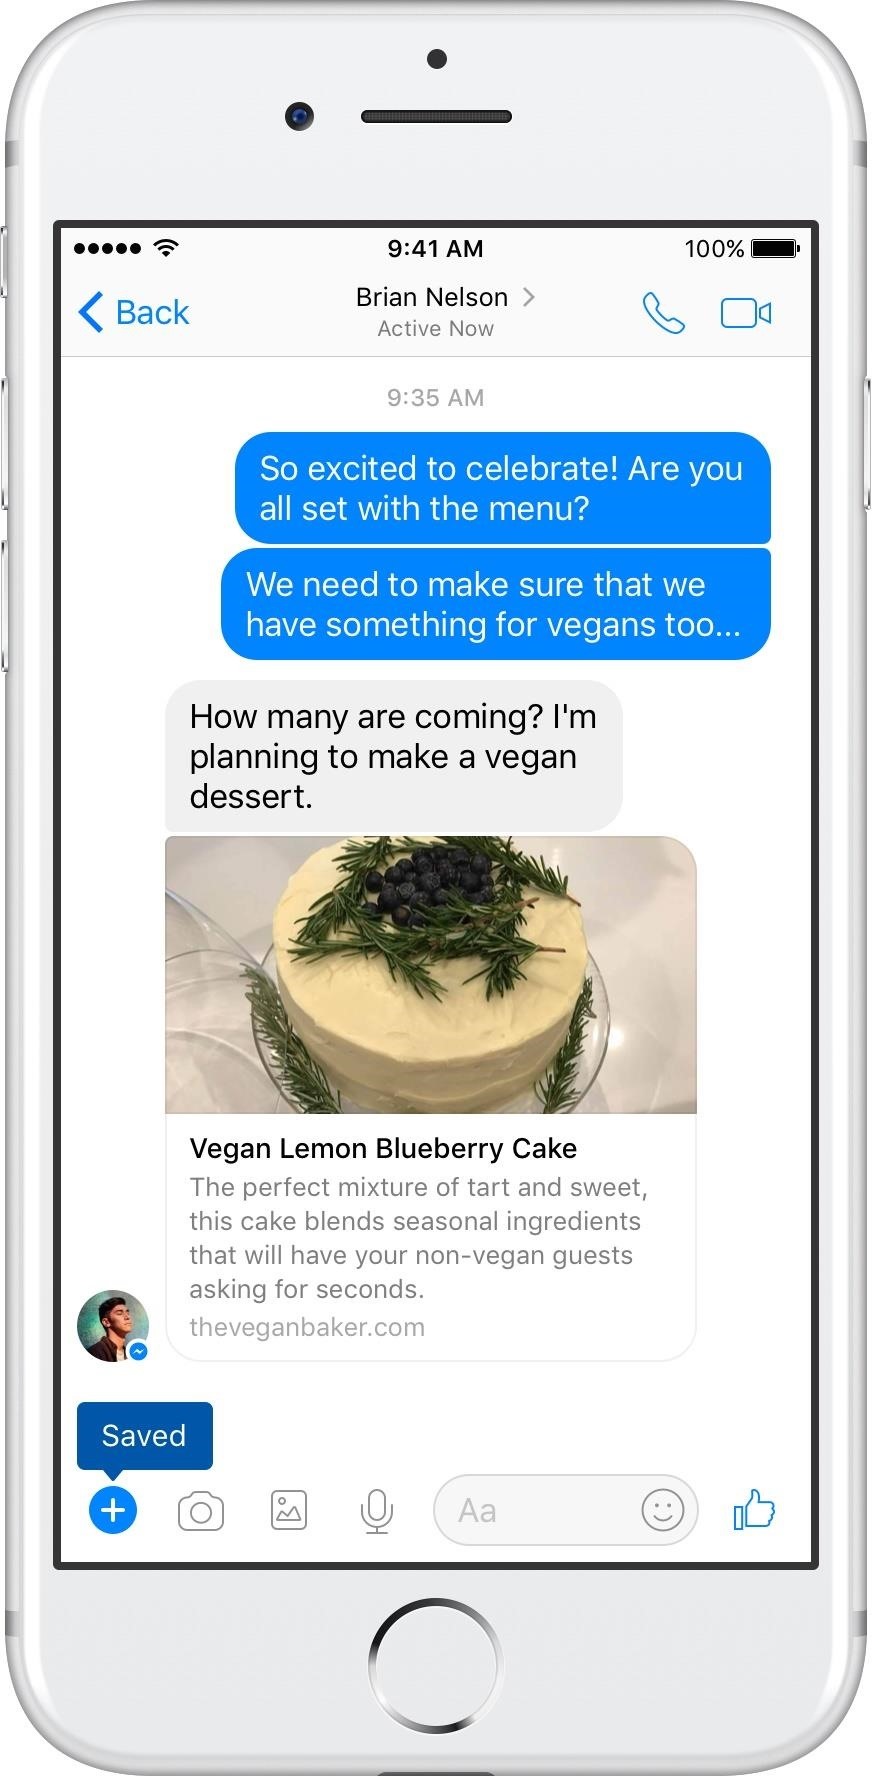 Facebook's AI-Powered Assistant Just Keeps Getting Better with Latest Update